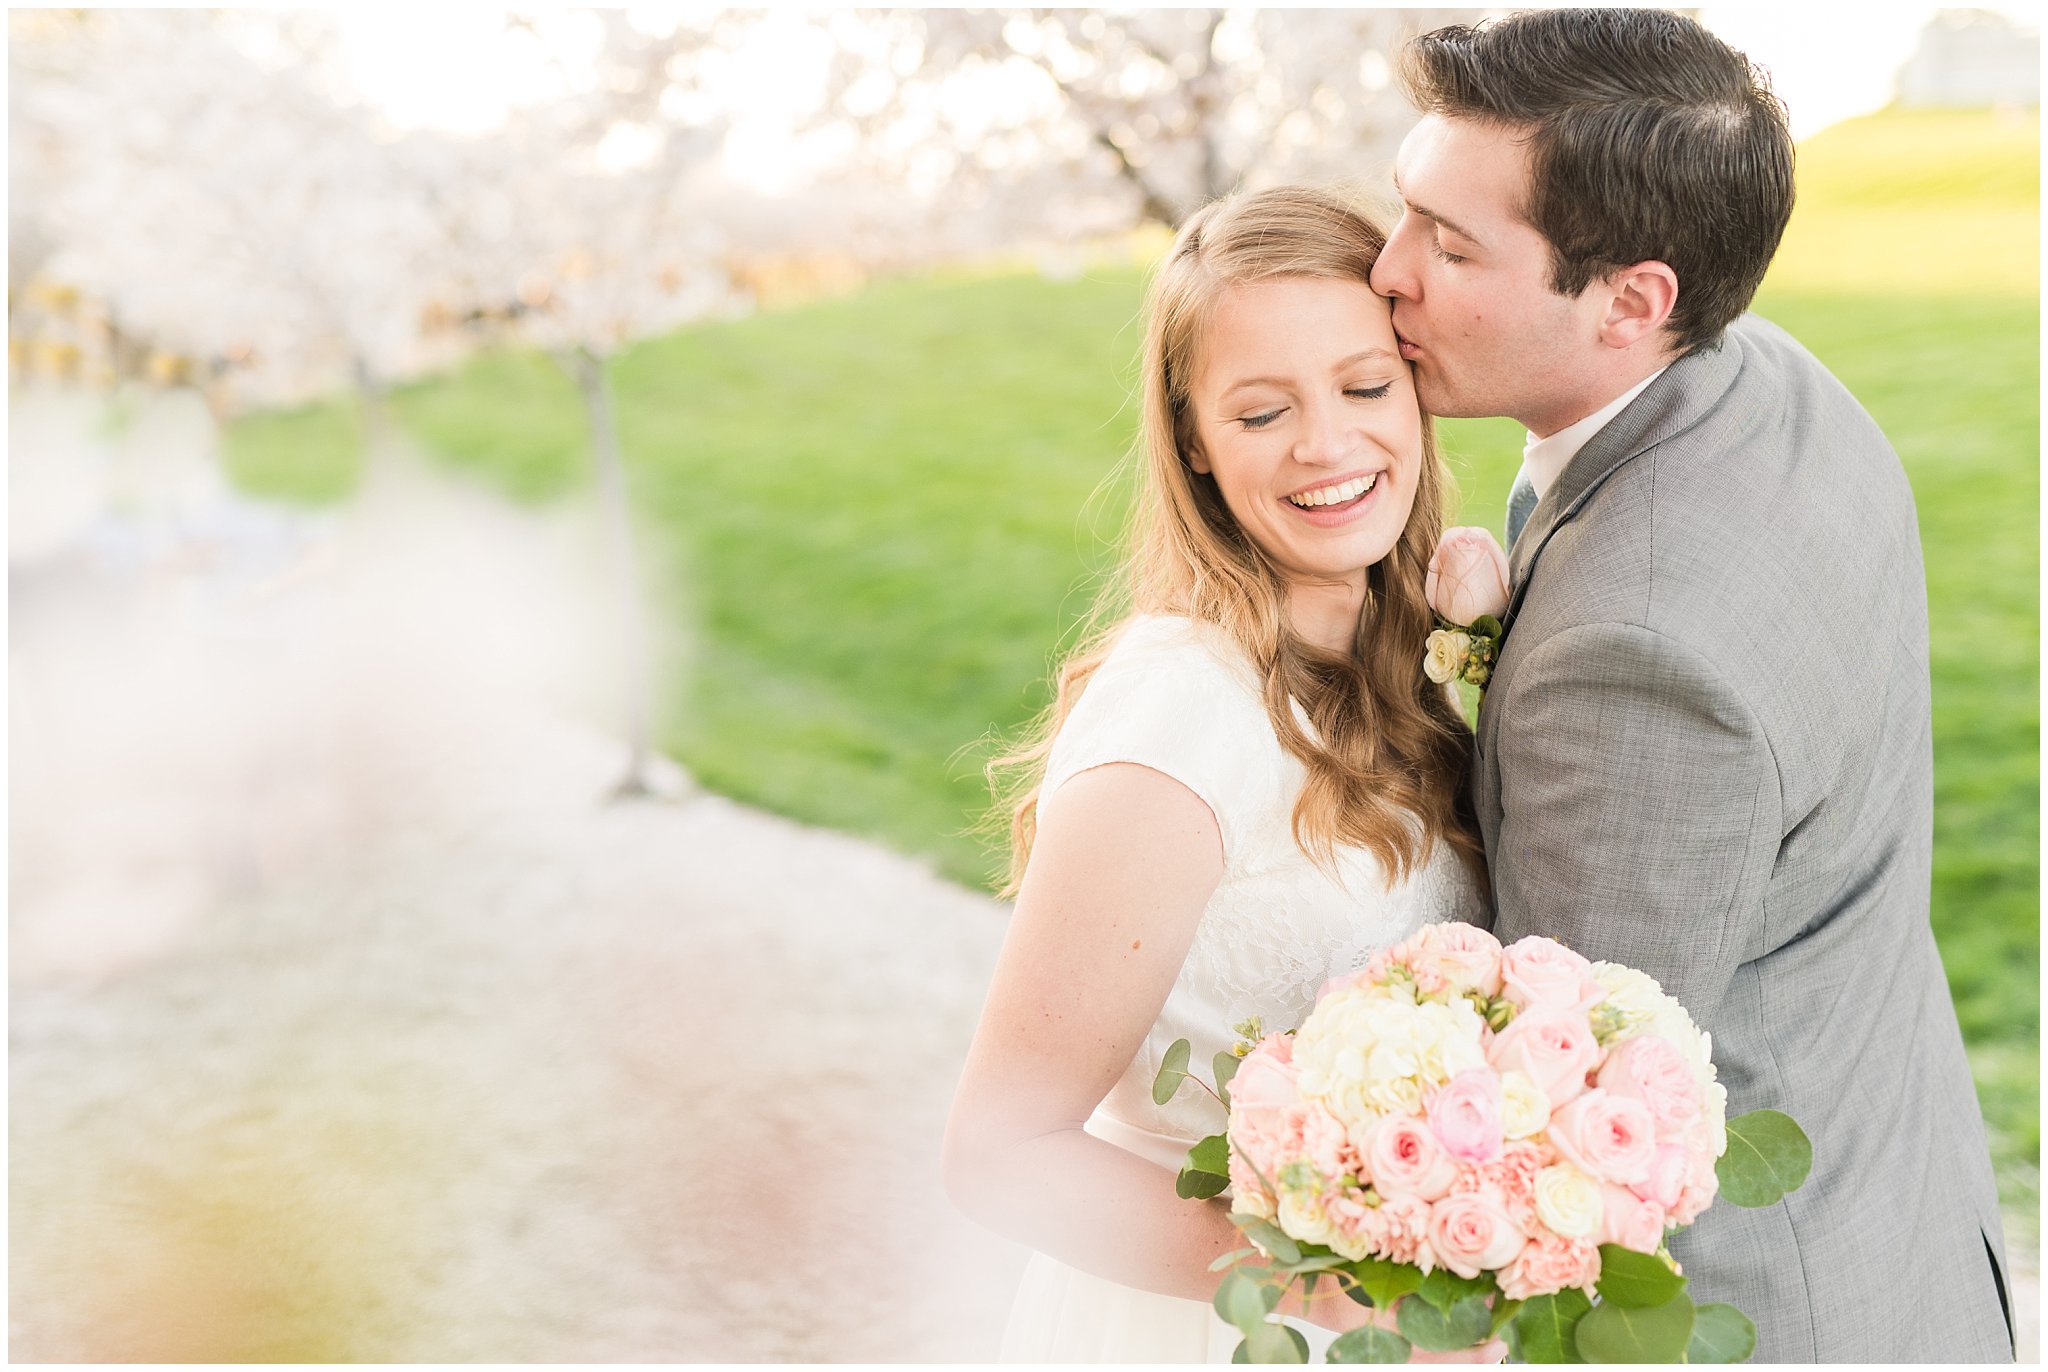 Bride with blush bouquet and groom with grey suit in the cherry blossoms | Utah State Capitol Blossoms Formal Session | Salt Lake Wedding Photographers | Jessie and Dallin Photography